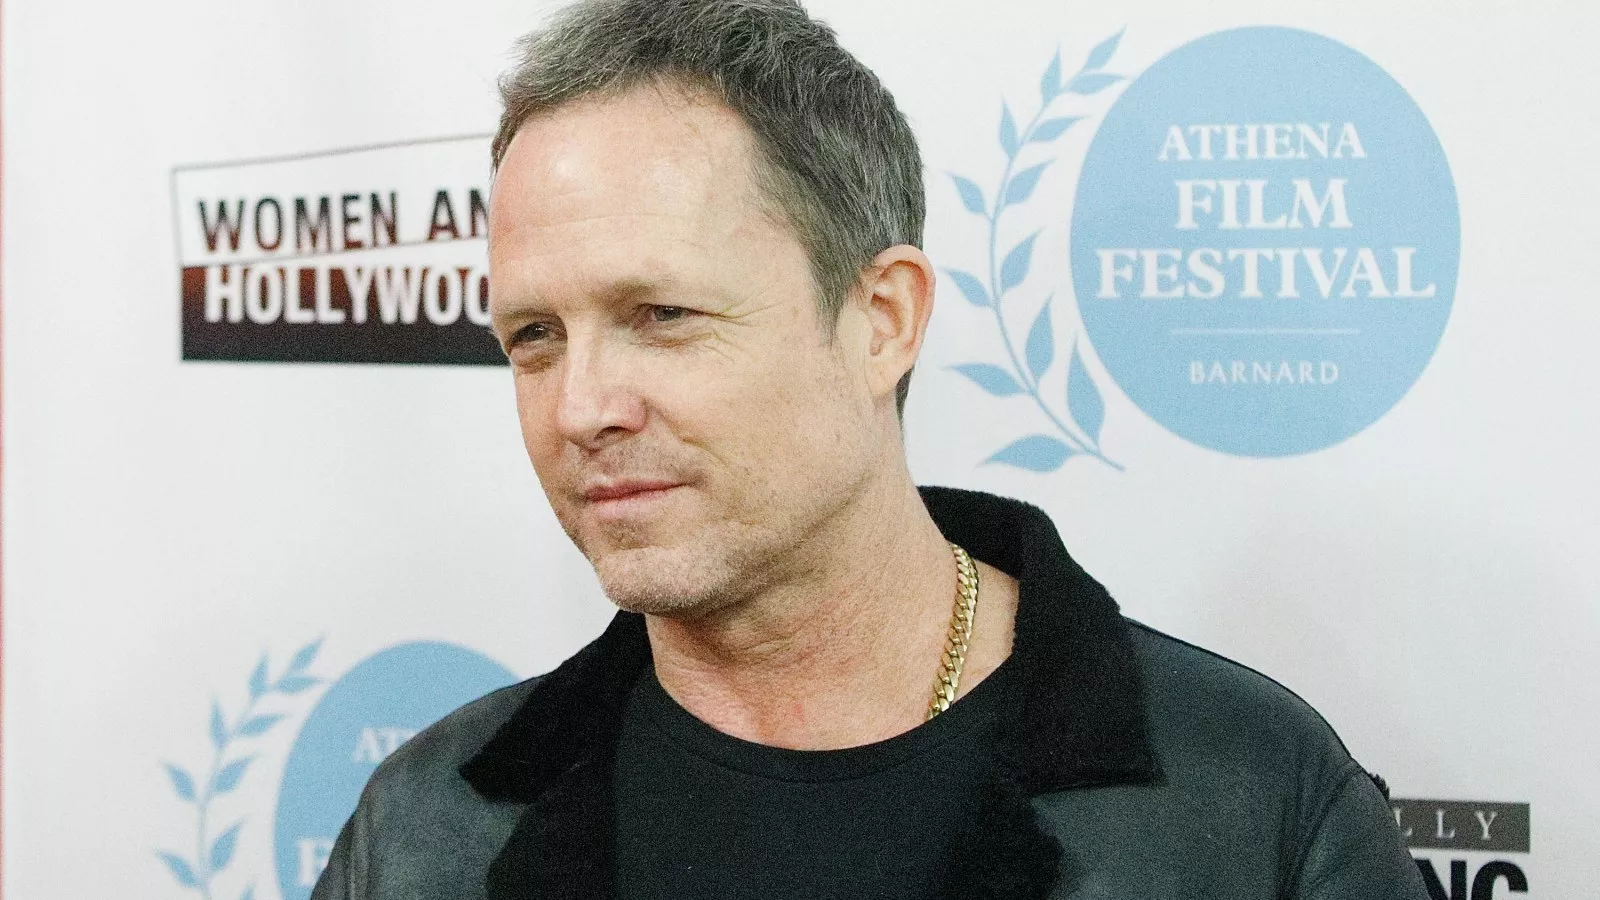 Why Allstate's Mayhem Actor Dean Winters Had Multiple Amputations